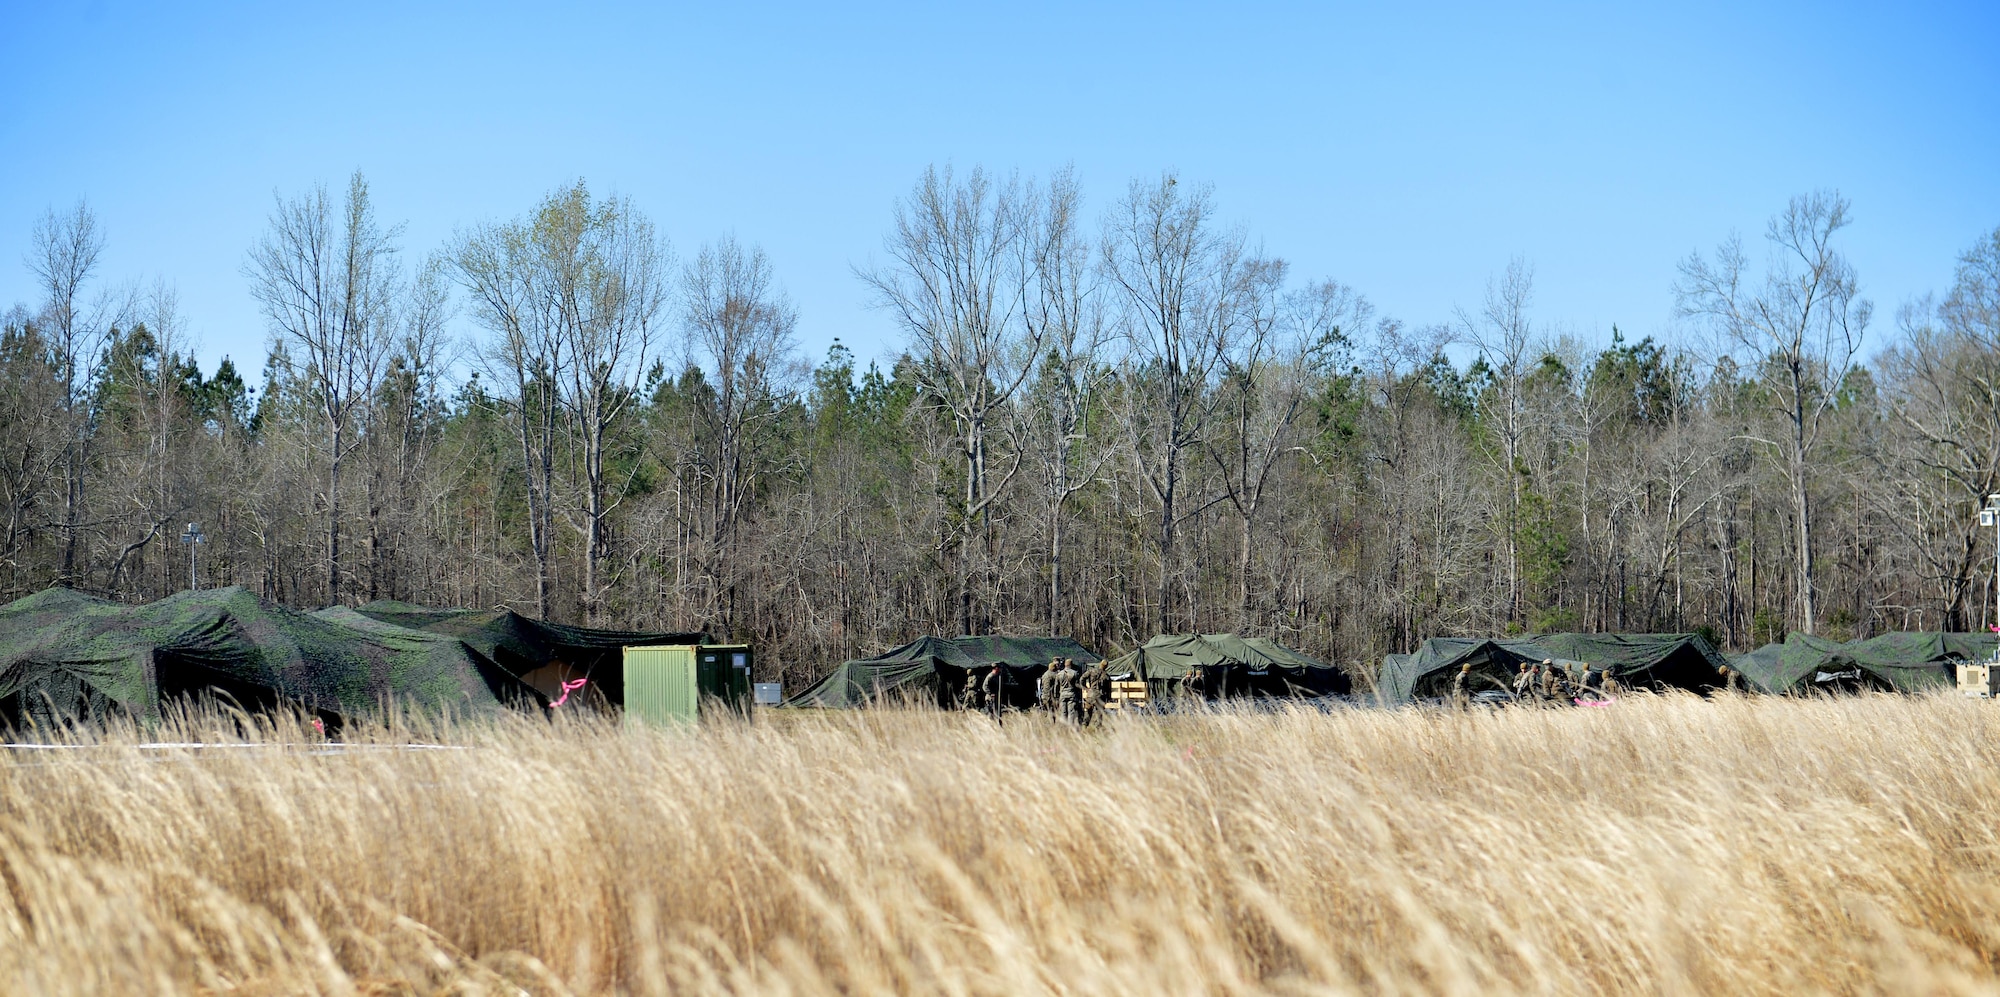 U.S. Marines assigned to Marine Wing Support Detachment 31 stationed at Marine Corps Air Station Beaufort, S.C., undergo training at Poinsett Electronic Combat Range near Wedgefield, S.C., March 23, 2017. Approximately 150 Marines from the detachment “deployed” to Poinsett range to evaluate their ability to accomplish mission essential tasks in a deployed environment. (U.S. Air Force photo by Airman 1st Class Christopher Maldonado)